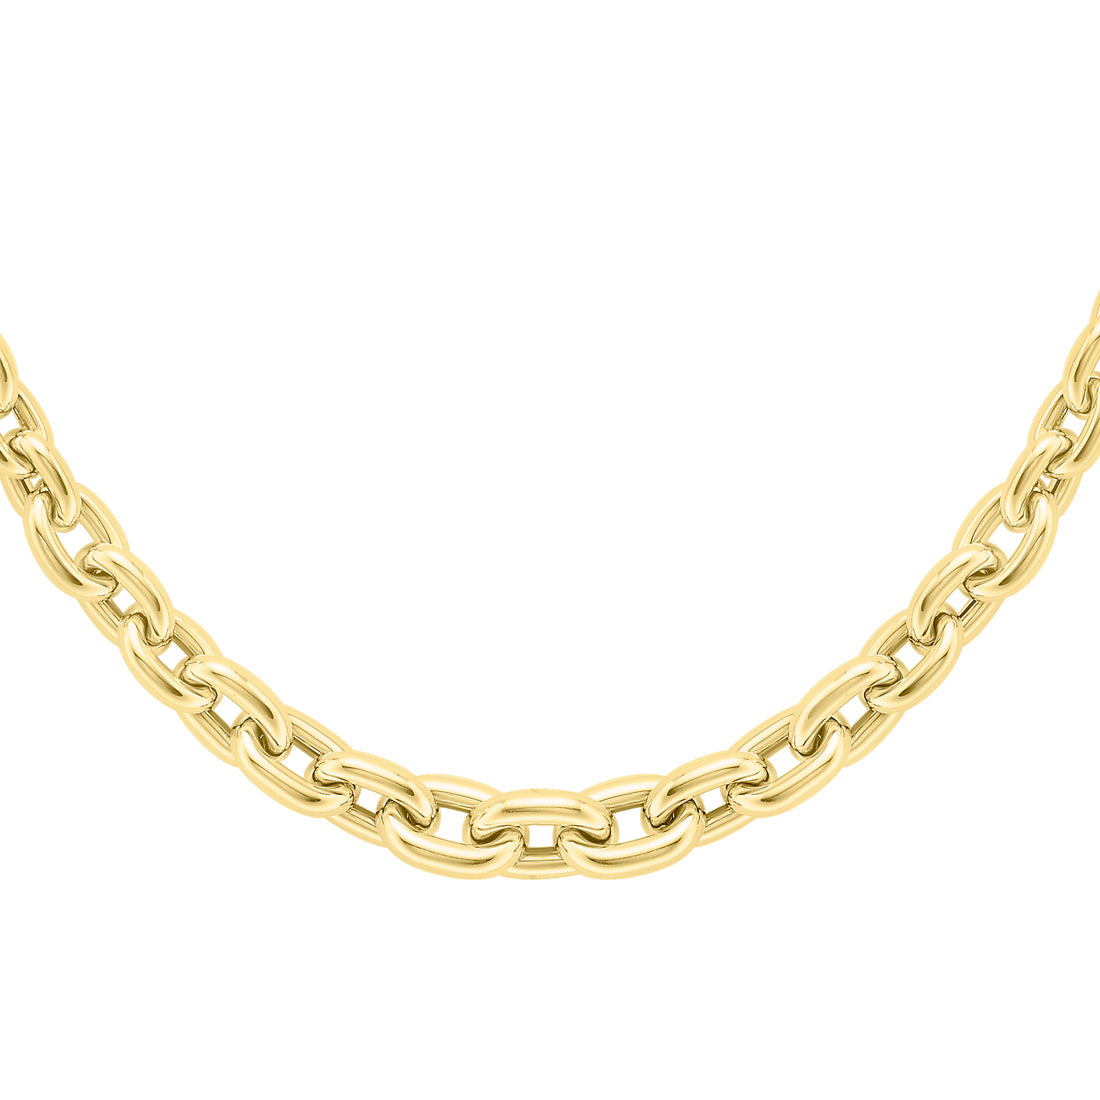 9ct. Yellow Gold Fancy Link Necklace - Robert Anthony Jewellers, Edinburgh